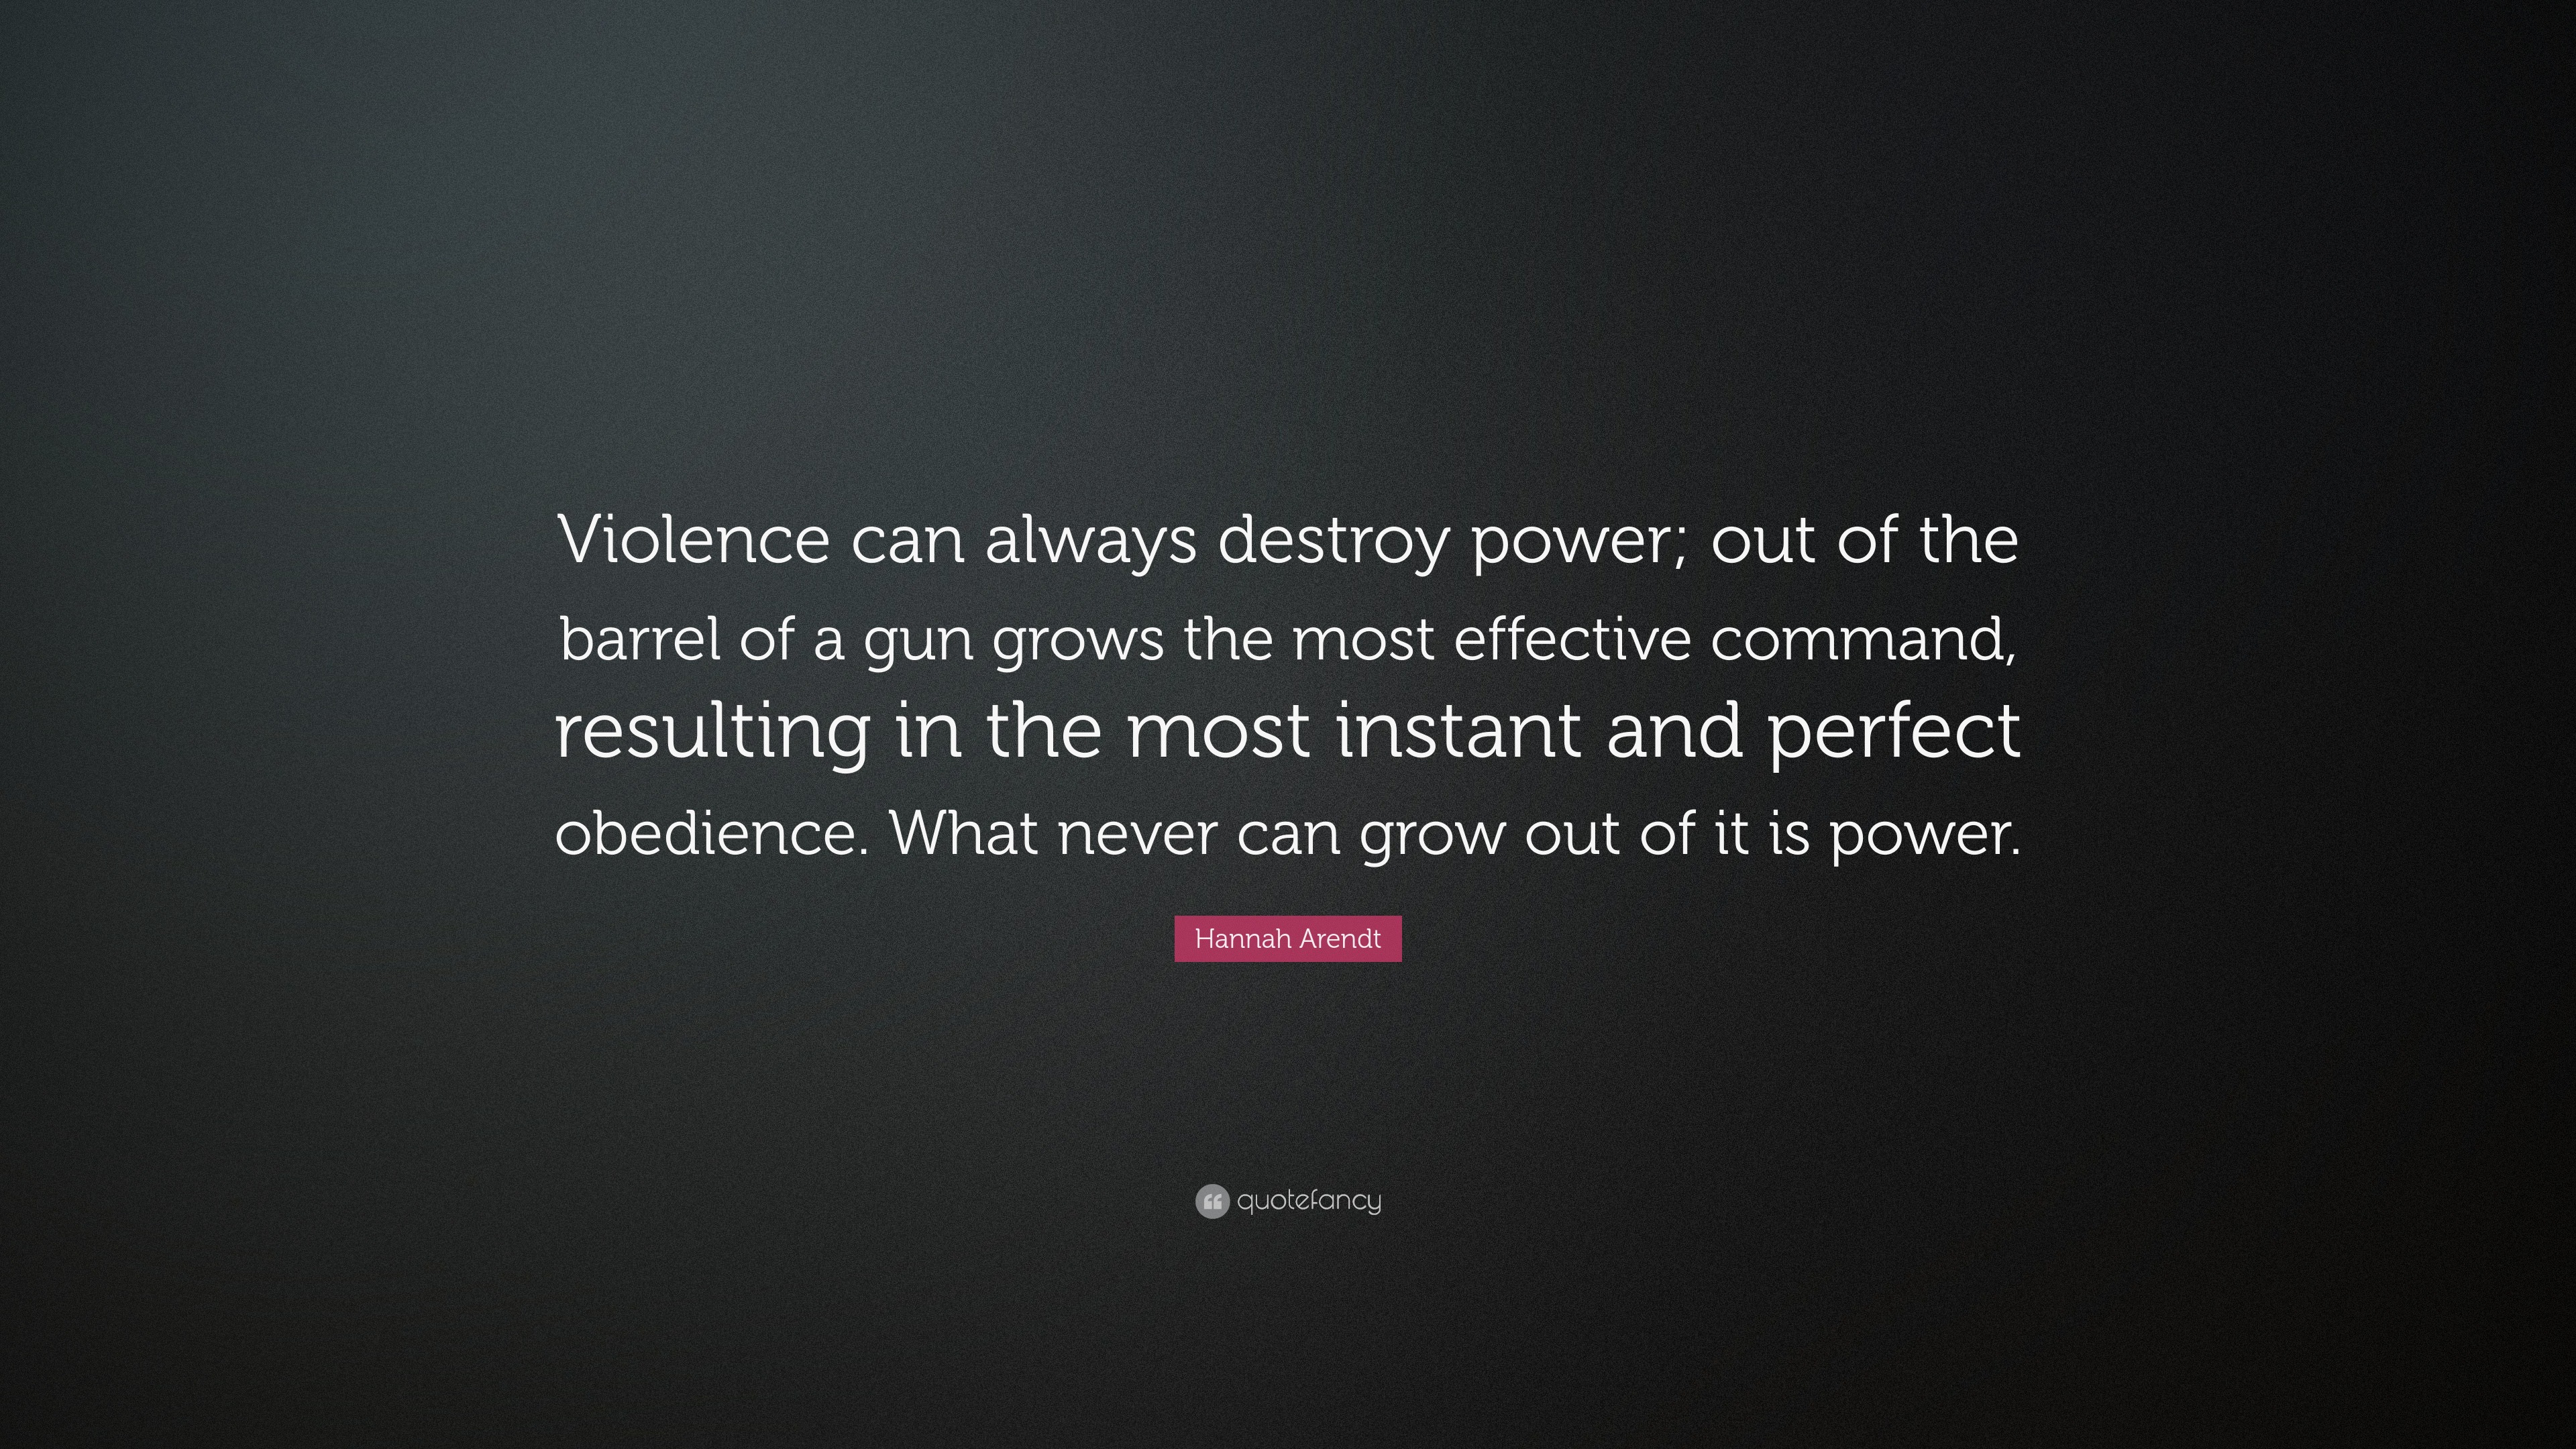 On Violence by Hannah Arendt